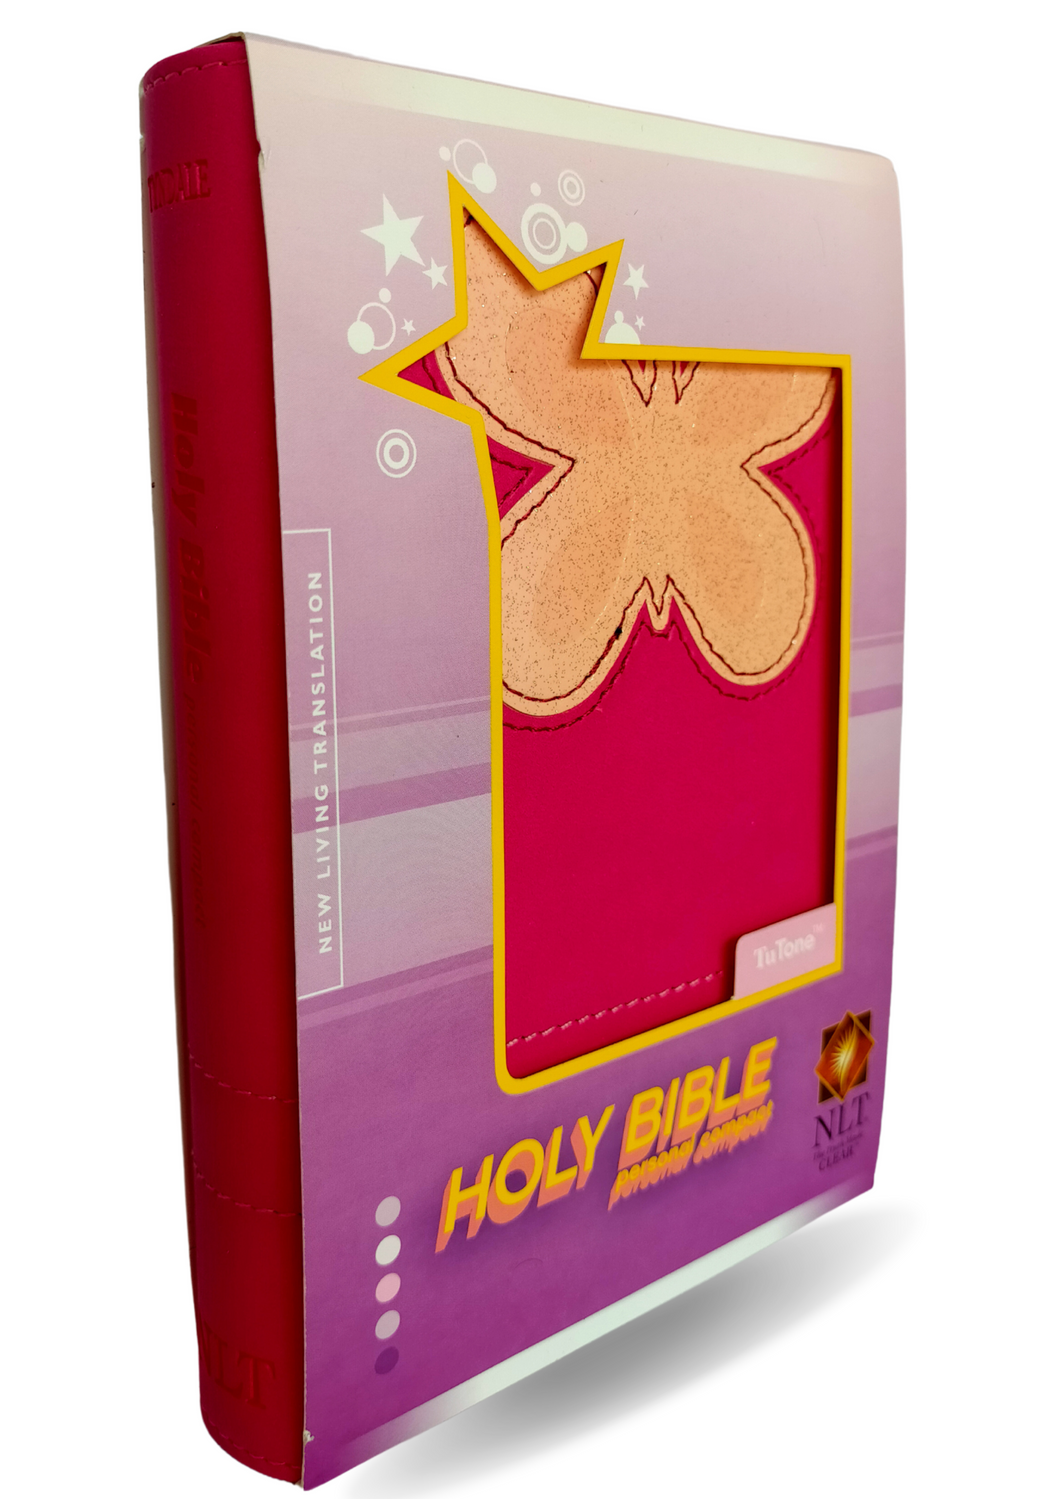 Holy Bible, Personal Compact NLT, TuTone (